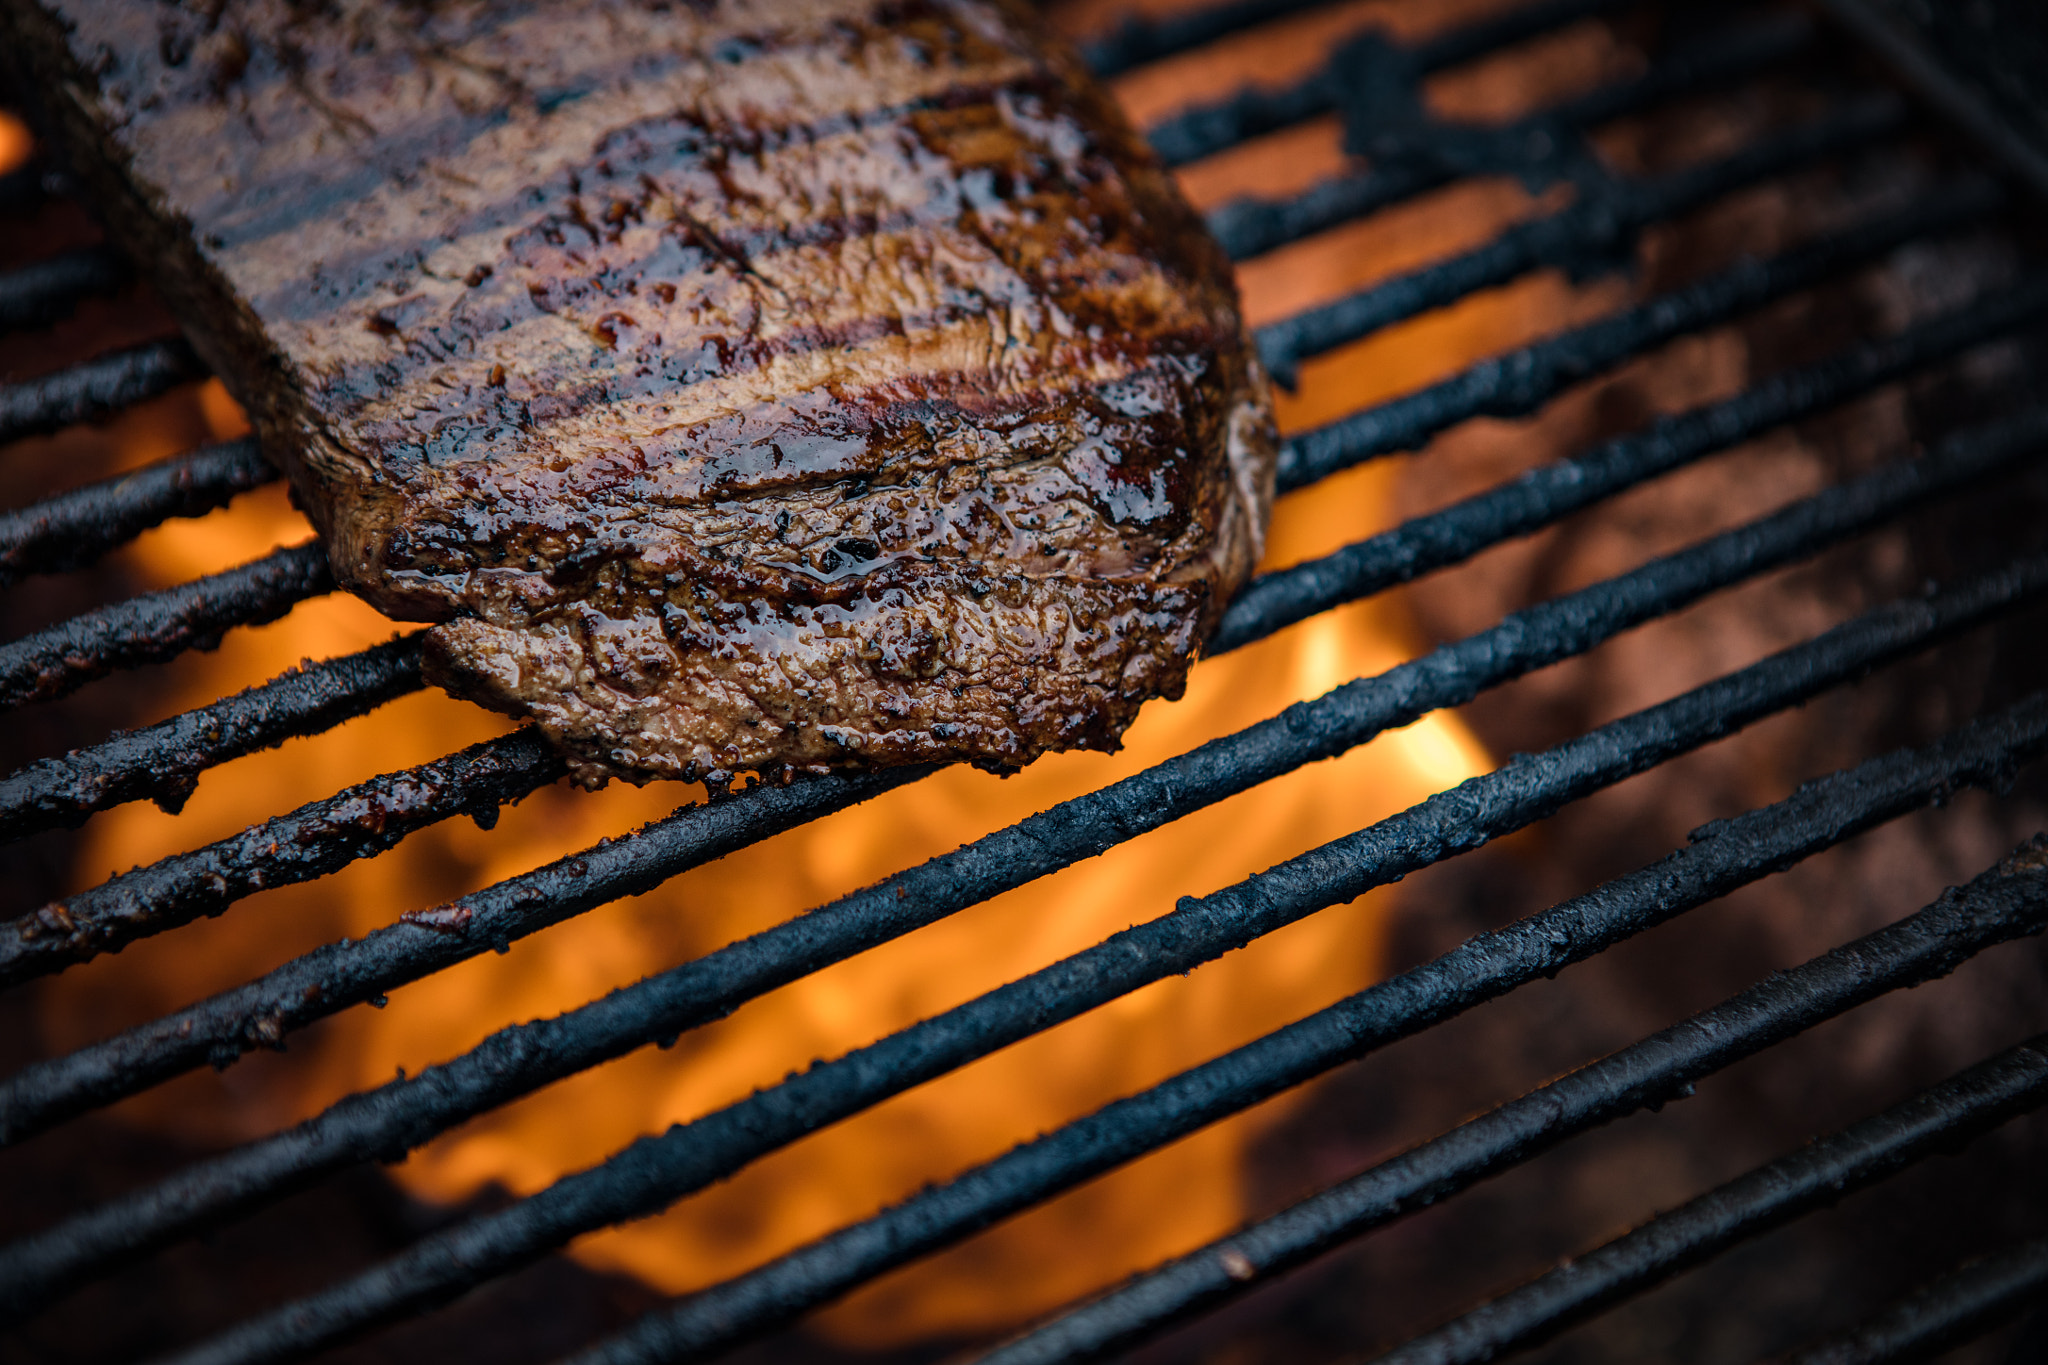 Canon EOS 5DS sample photo. Flank steak on grill photography